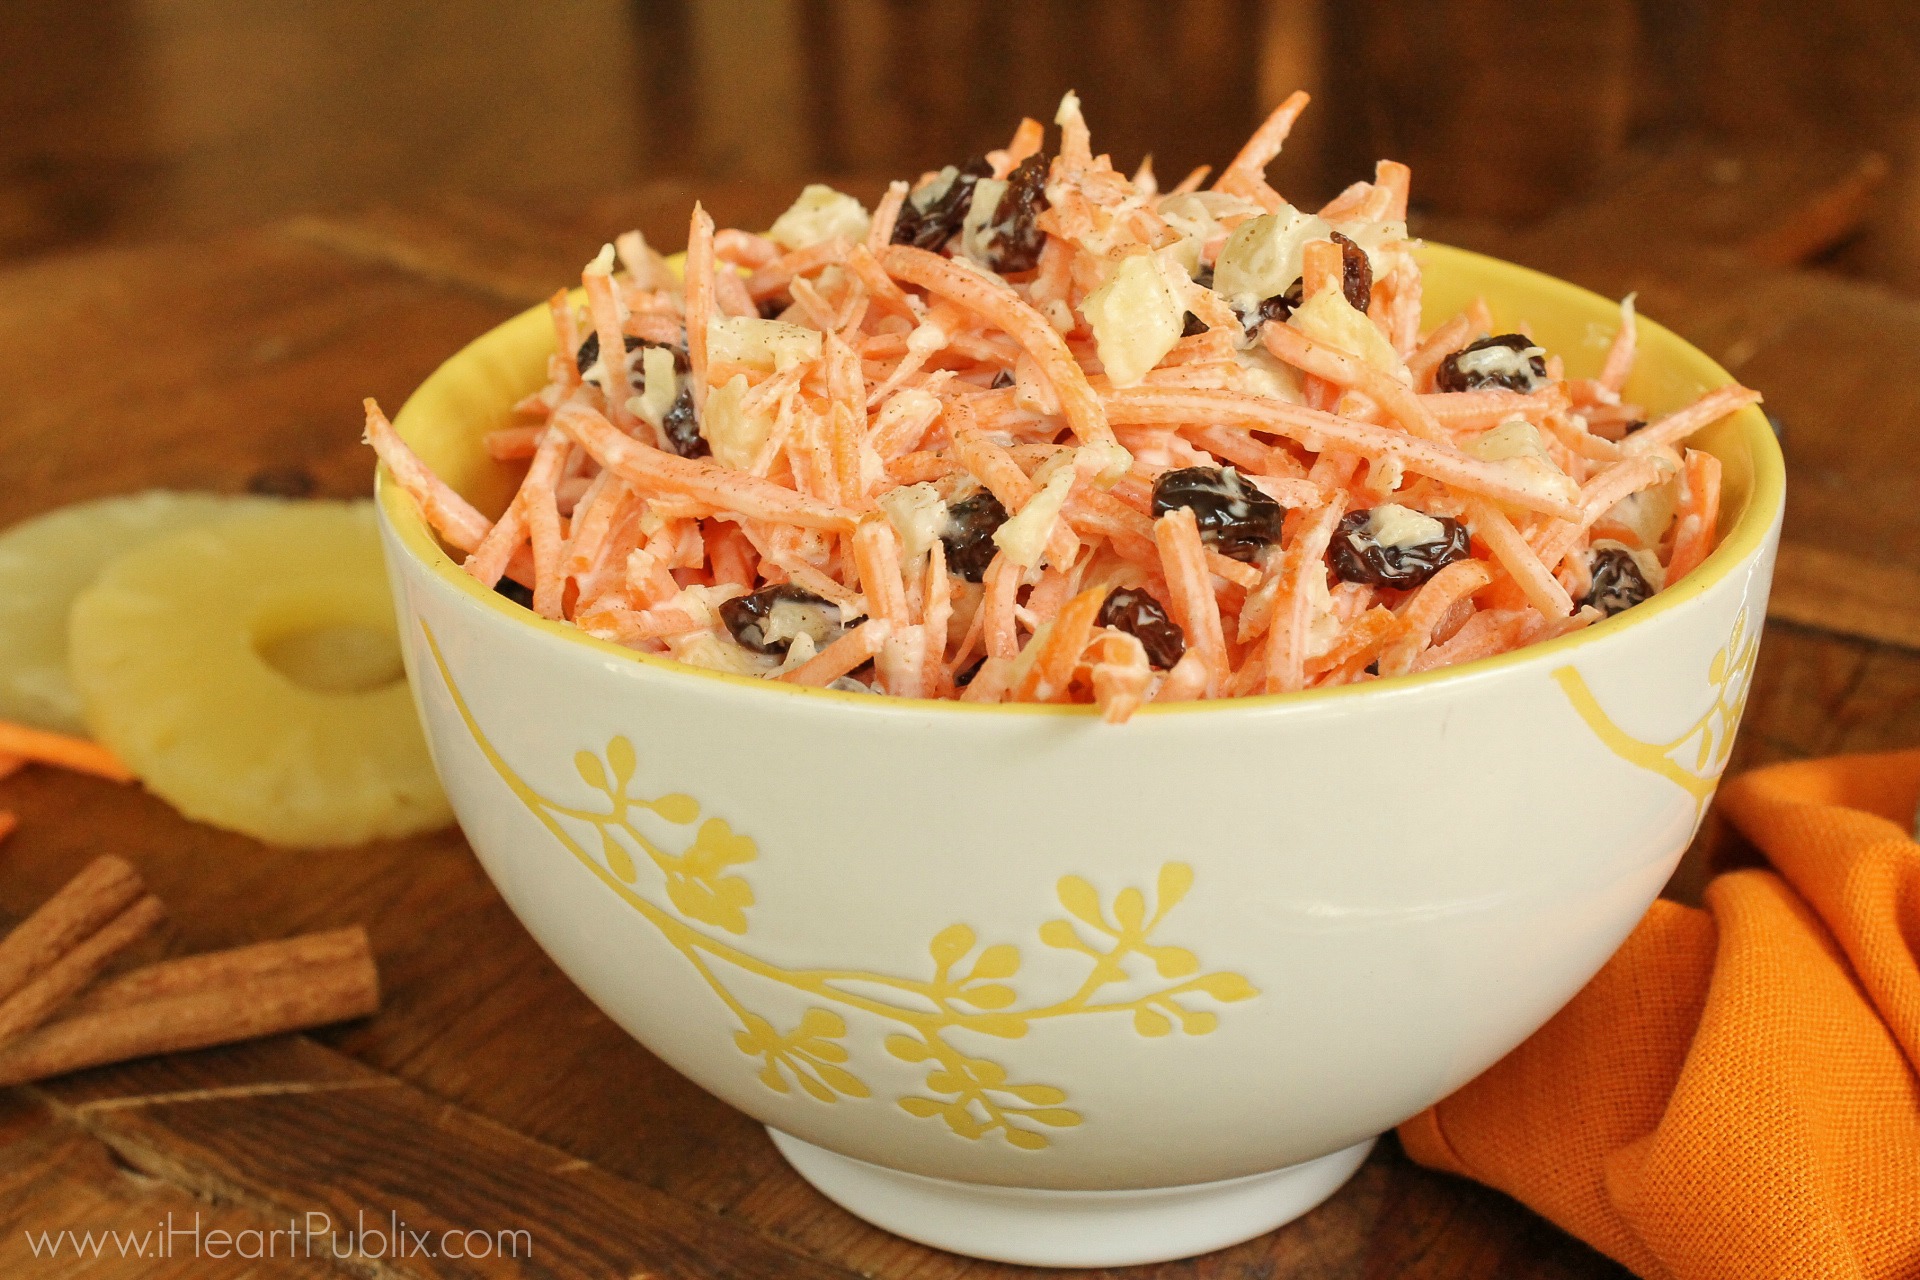 Tropical Pineapple-Carrot Salad - Delicious Recipe To Go With The Super Deal On Hellmann's Mayo At Publix 3